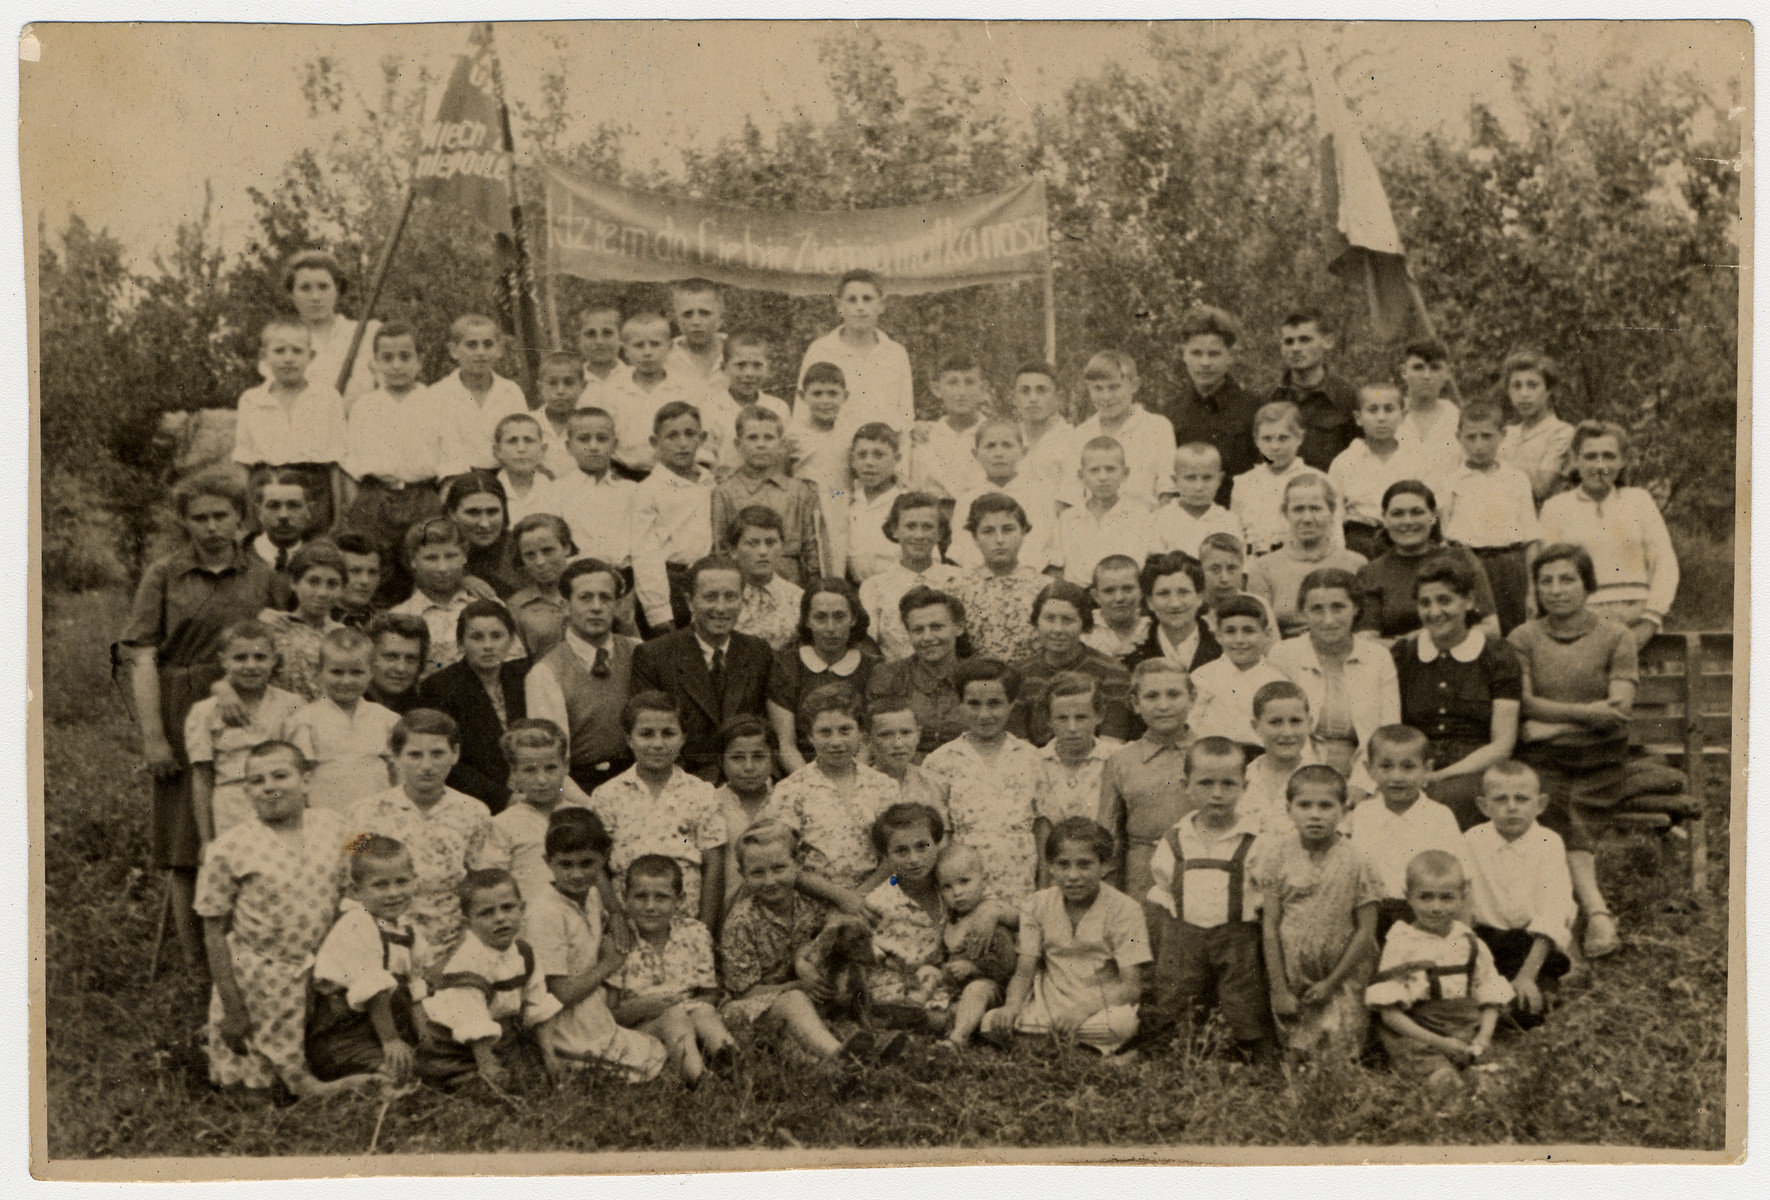 Group portrait of Polish-Jewish refugee children in an orphanage at the Pahta Abak-Kolhoz farm outside Andizhan, Uzbekistan shortly before they were repatriated to Poland.

Among those pictured is Irena Ceder (seated in front in a white dress, fifth from the right).